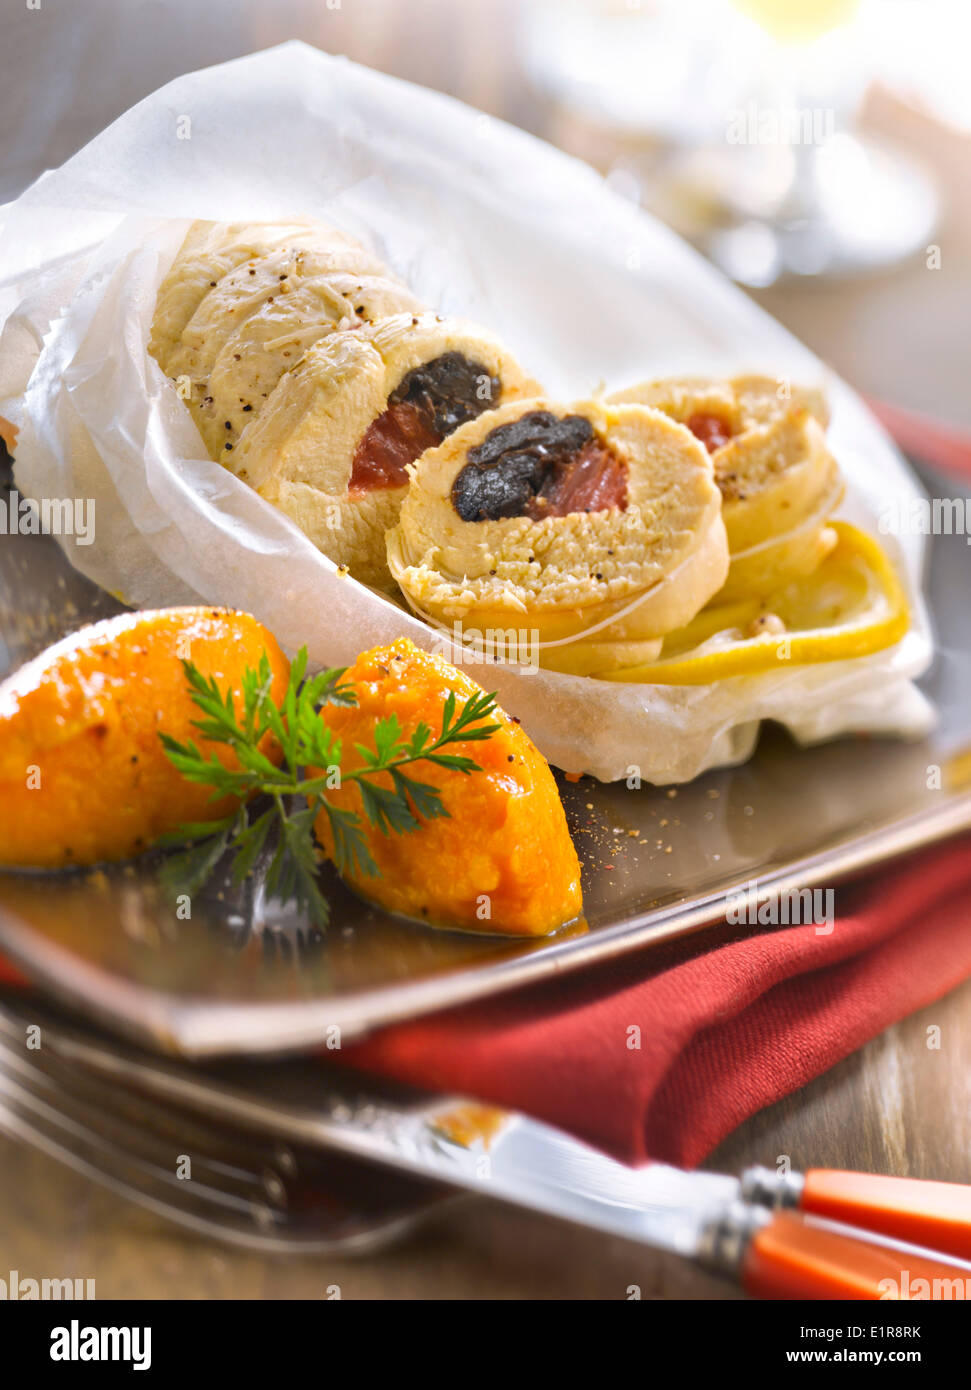 Chicken with citrus fruit and prunes cooked in wax paper,carrot puree Stock Photo